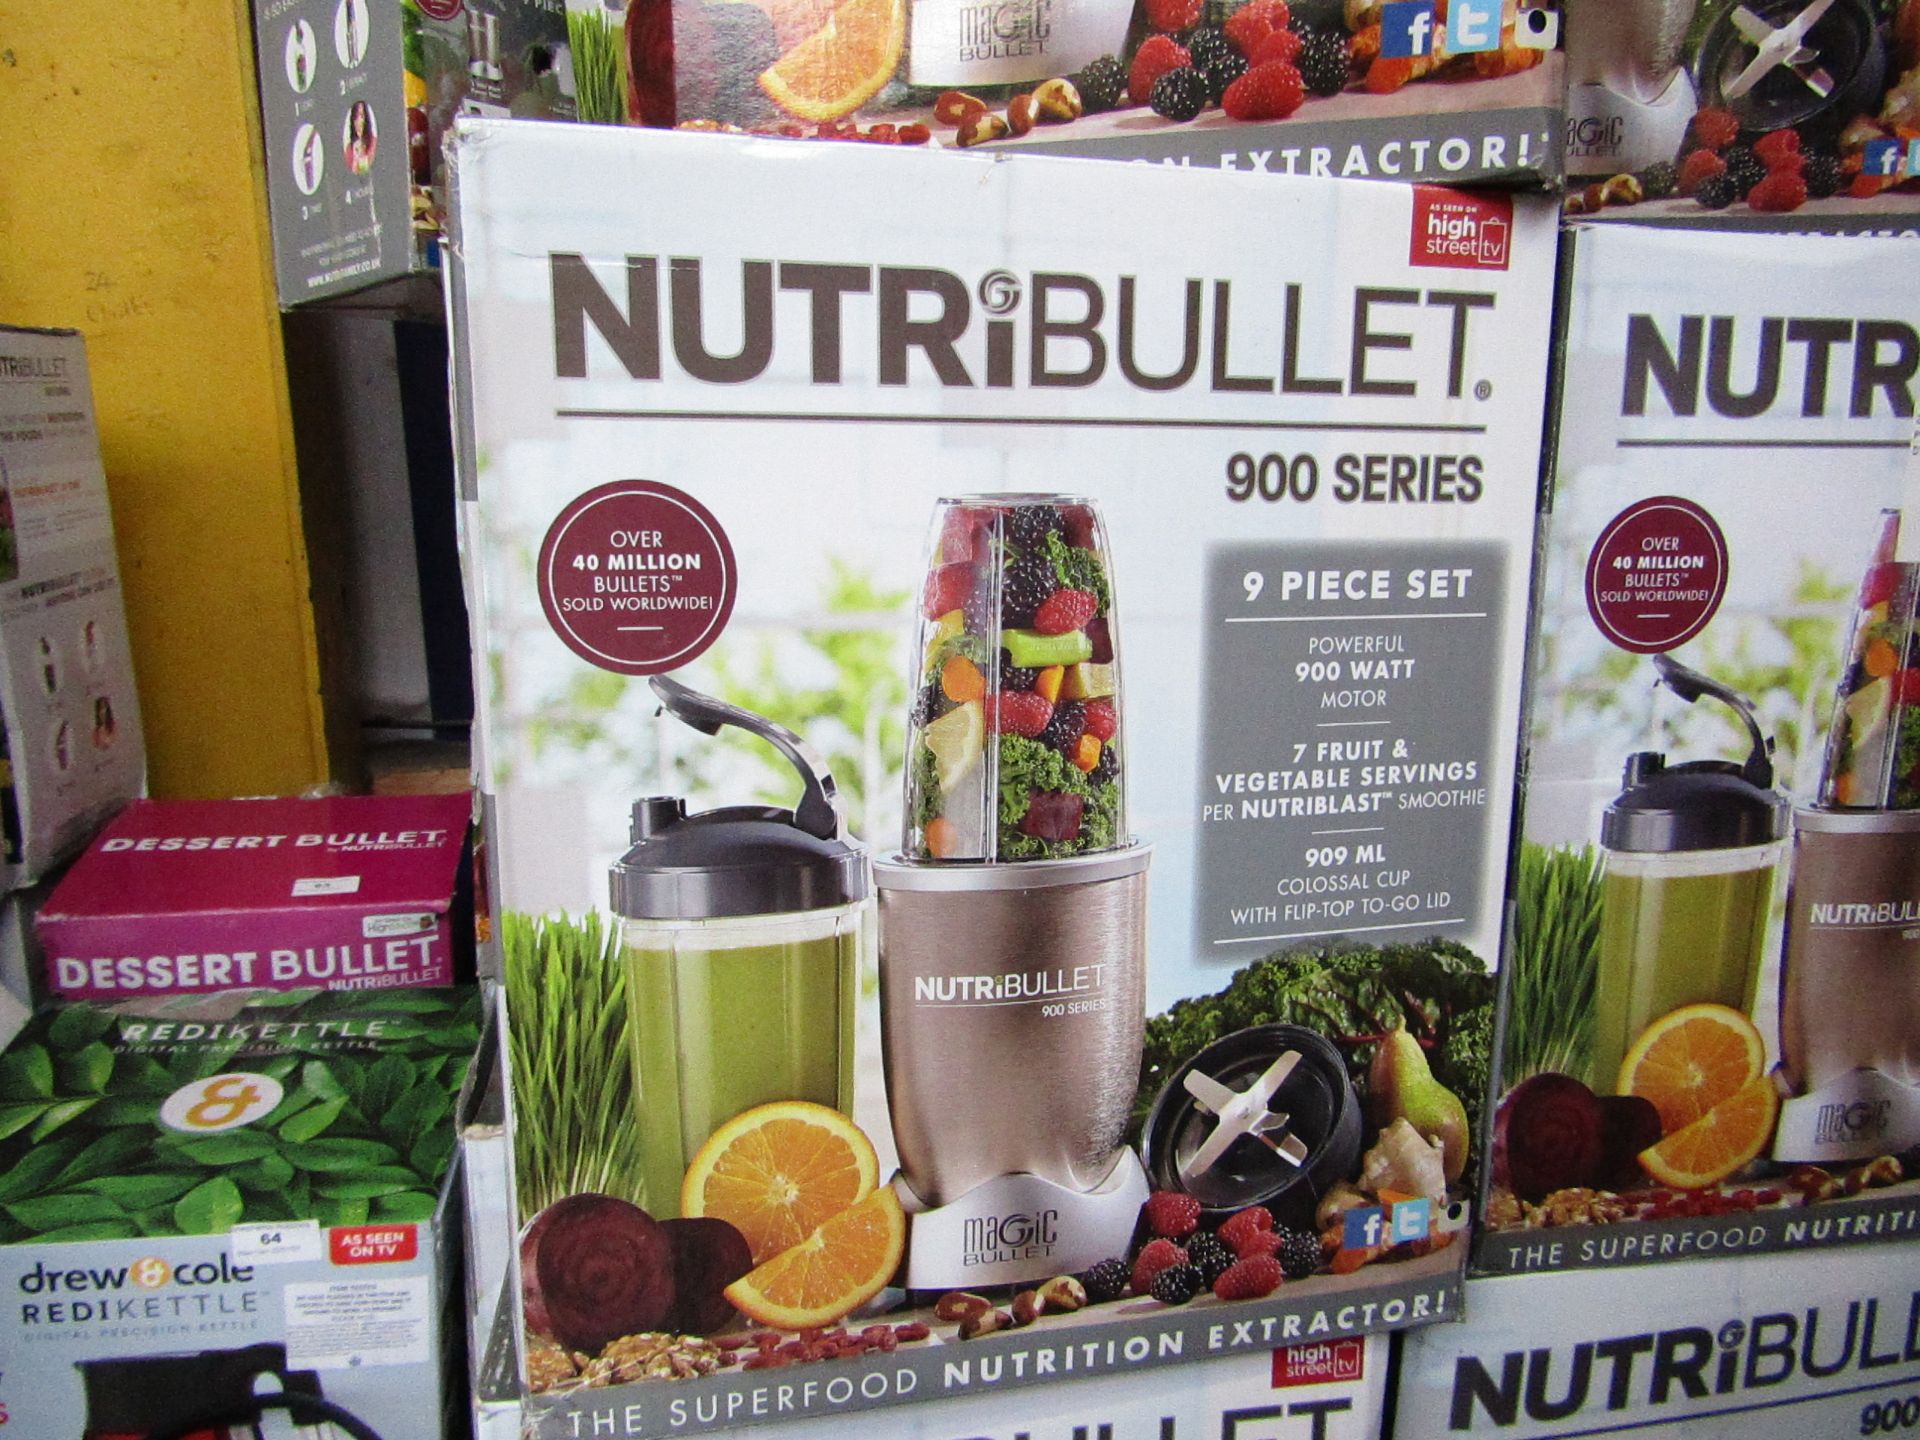 | 1X | NUTRIBULLET 900 SERIES | UNCHECKED AND BOXED | NO ONLINE RE-SALE | SKU C5060191467353 |